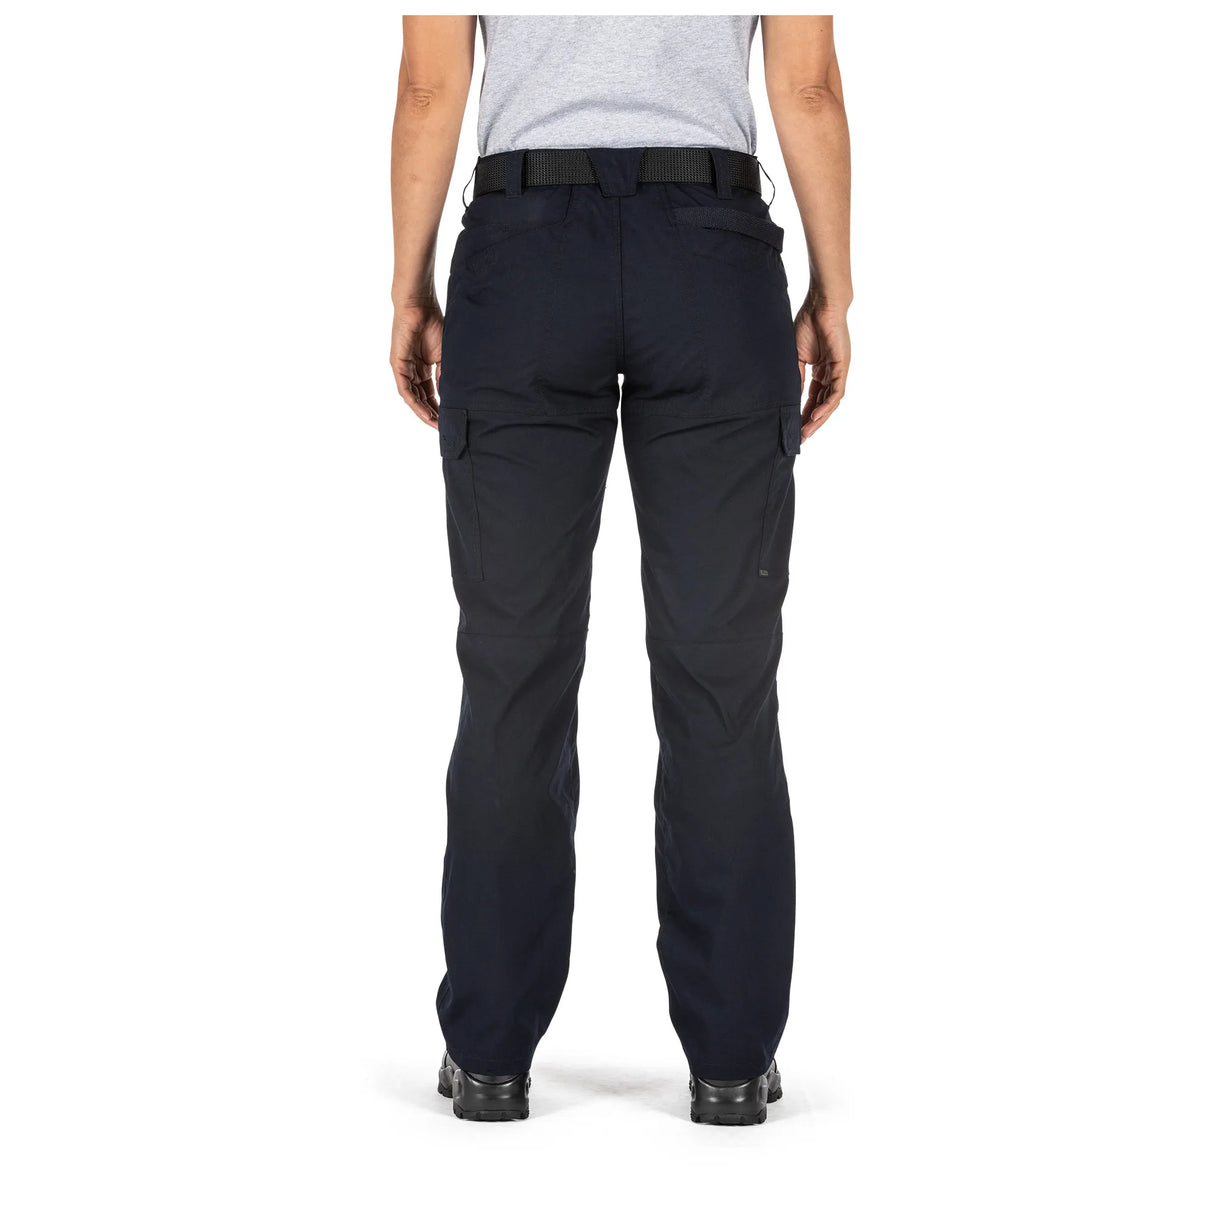 Reinforced Utility Pant: Features reinforcement at critical areas for added strength.